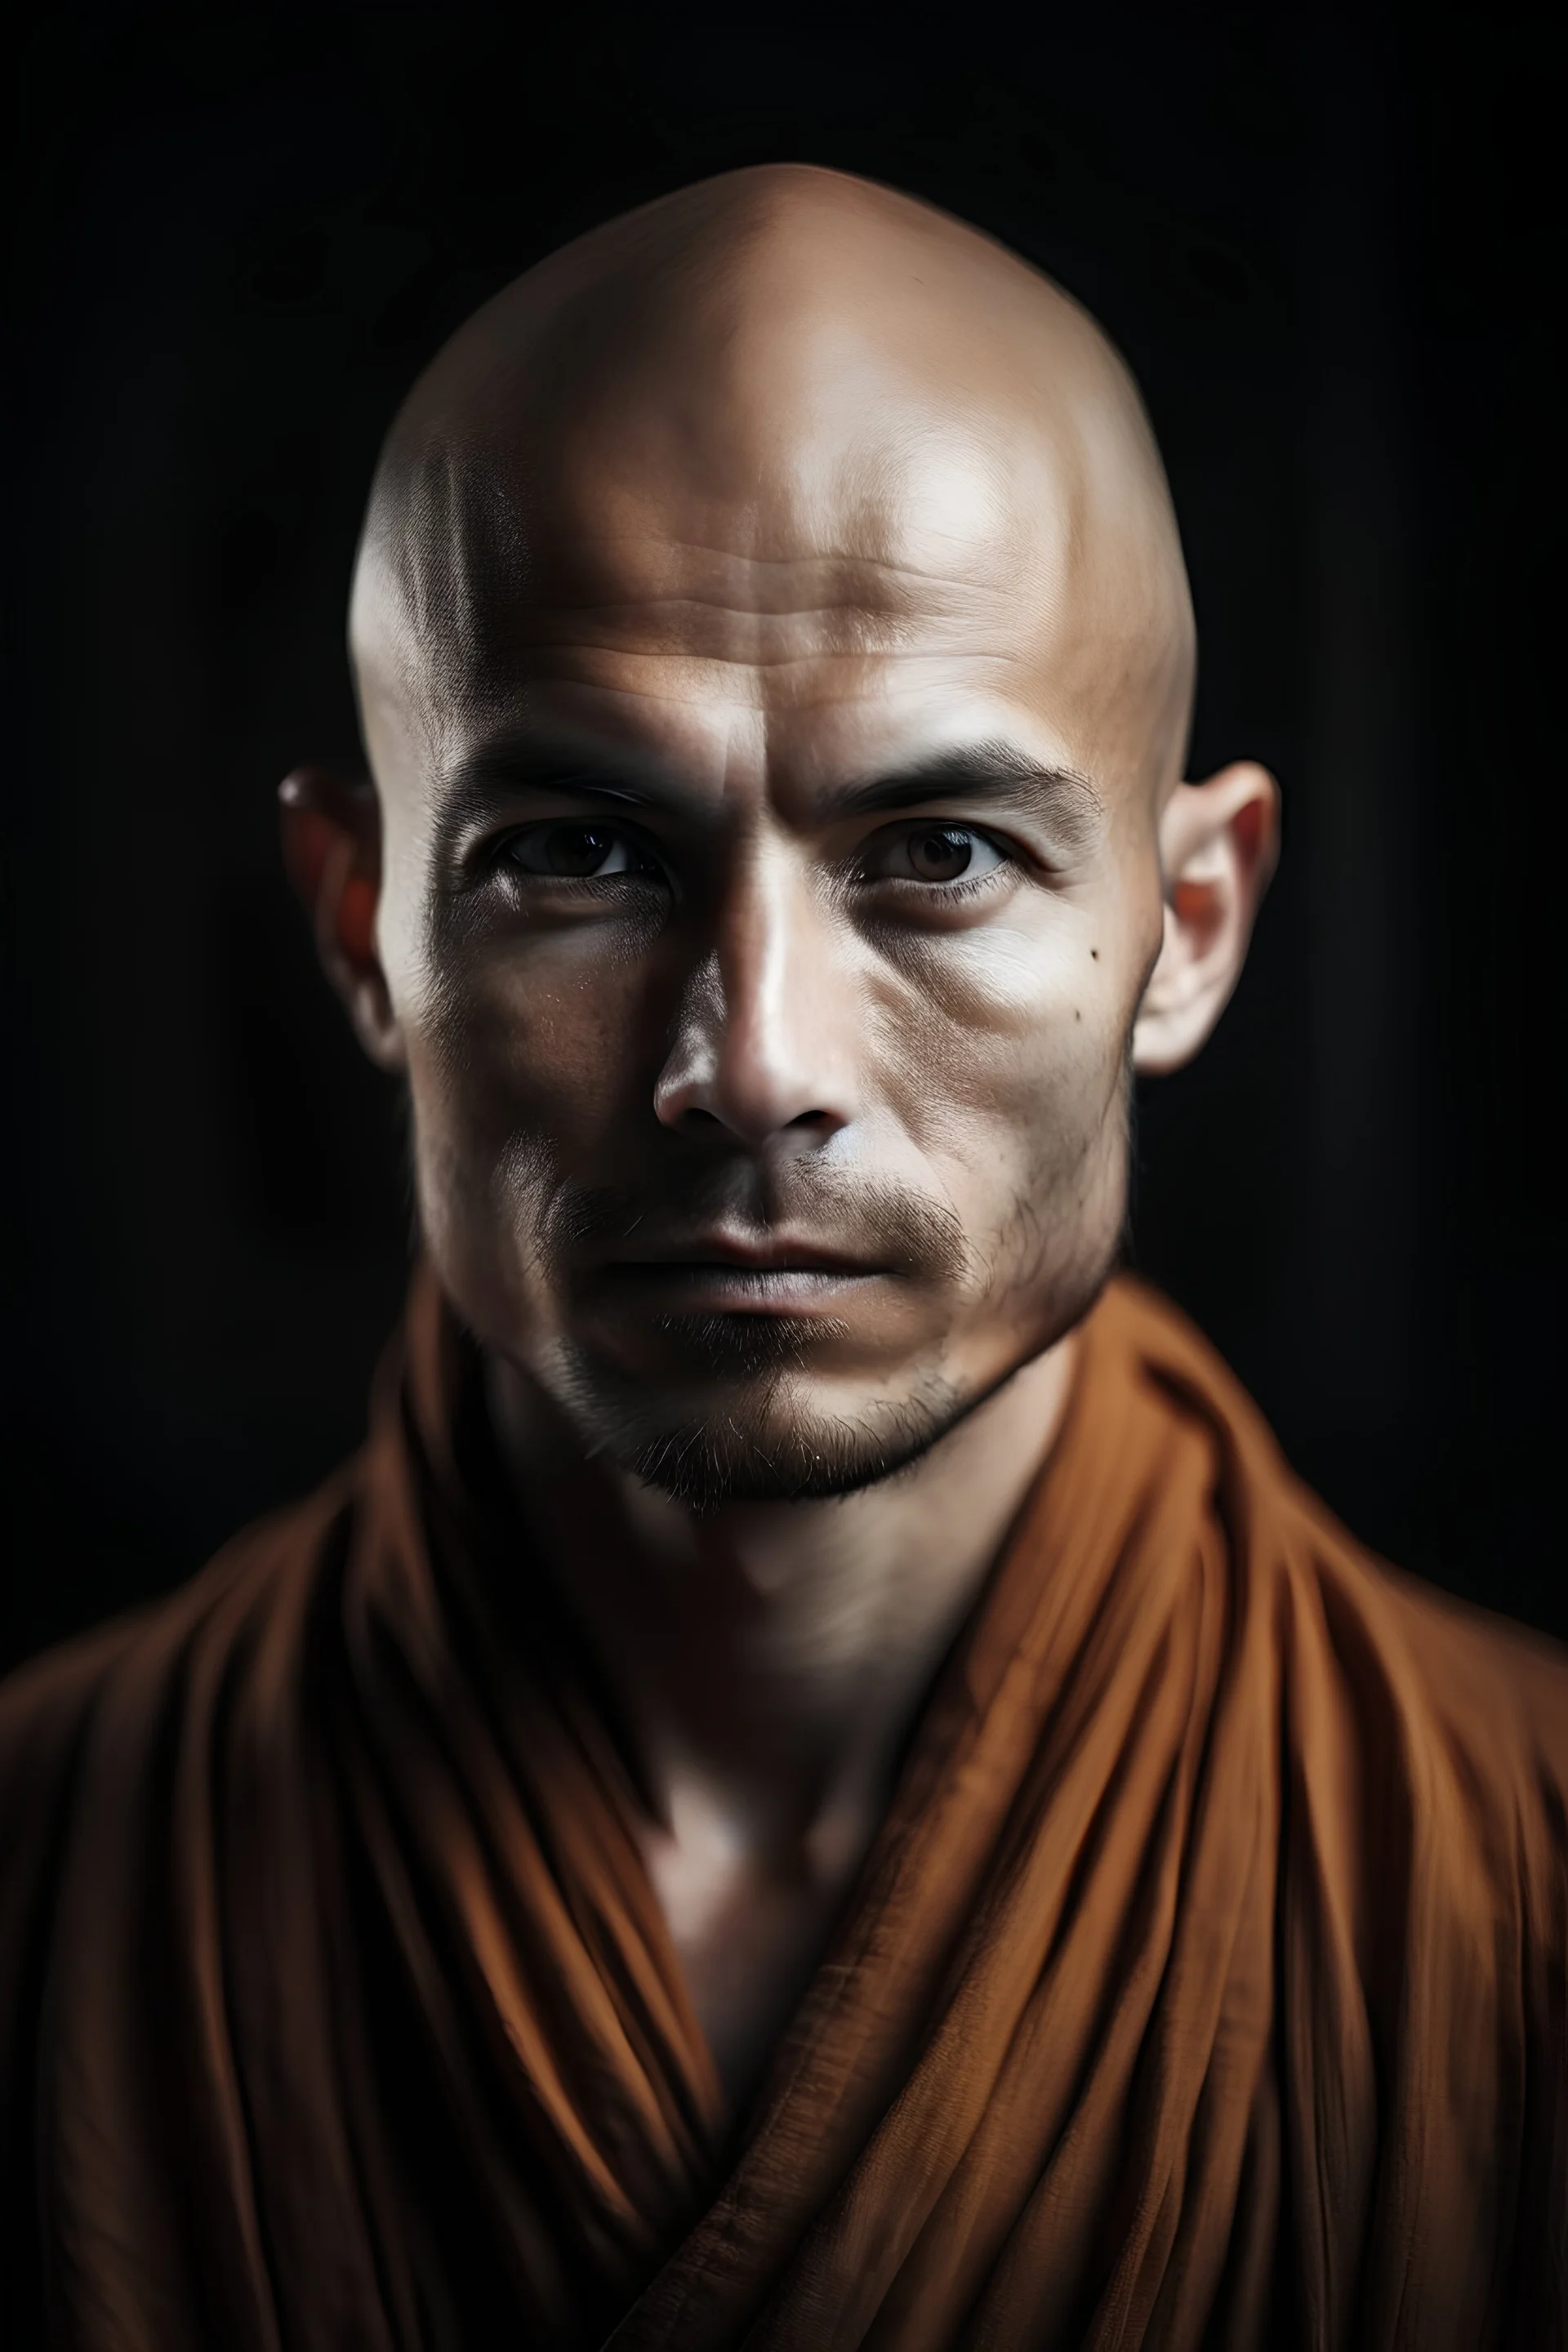 30 year old wise monk looking straight to the camera